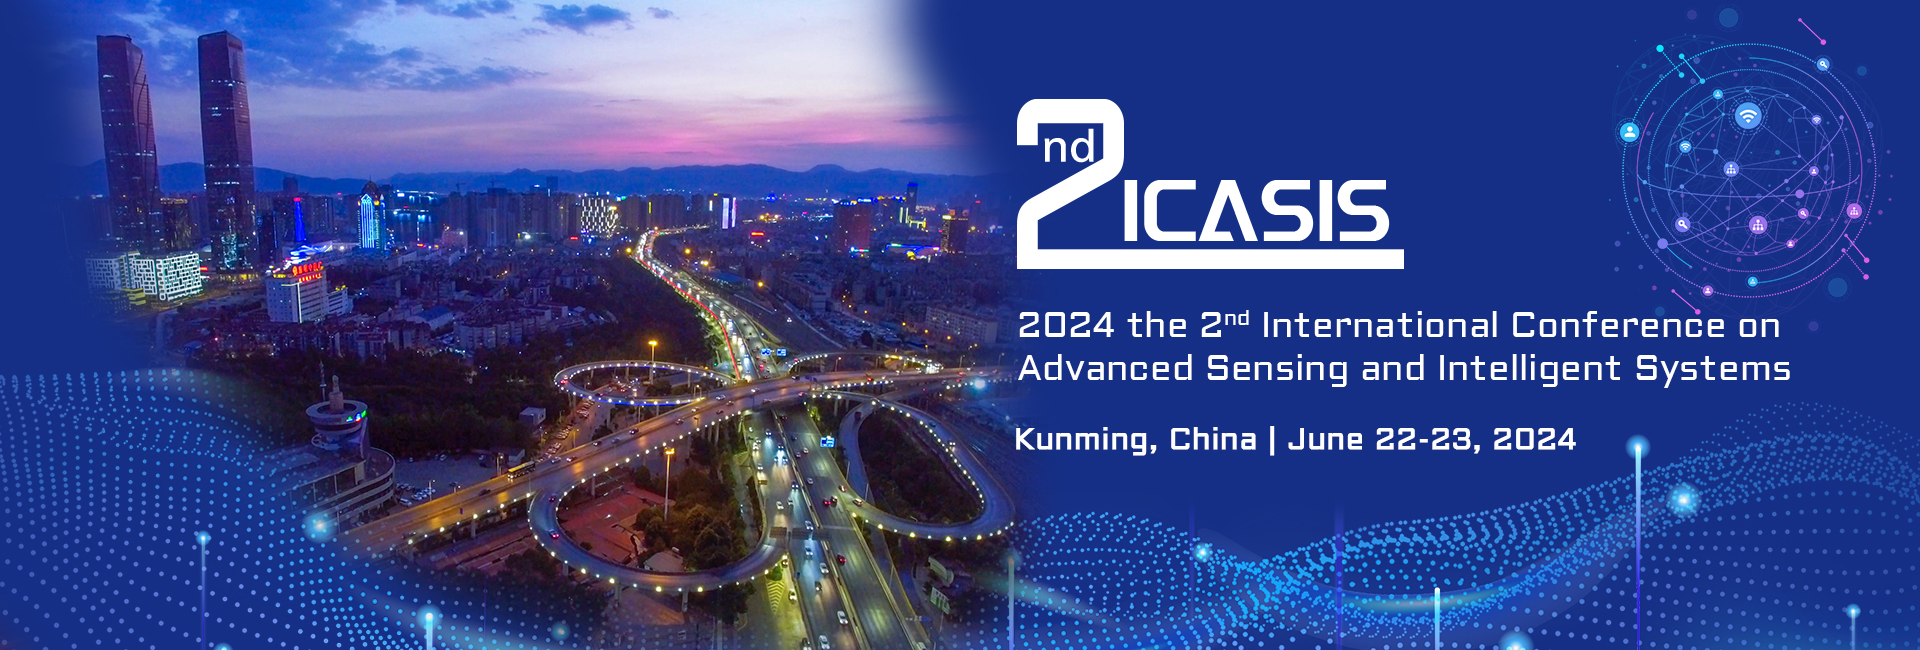 2nd International Conference on Advanced Sensing and Intelligent Systems（ICASIS2024）, Kunming, Yunnan, China